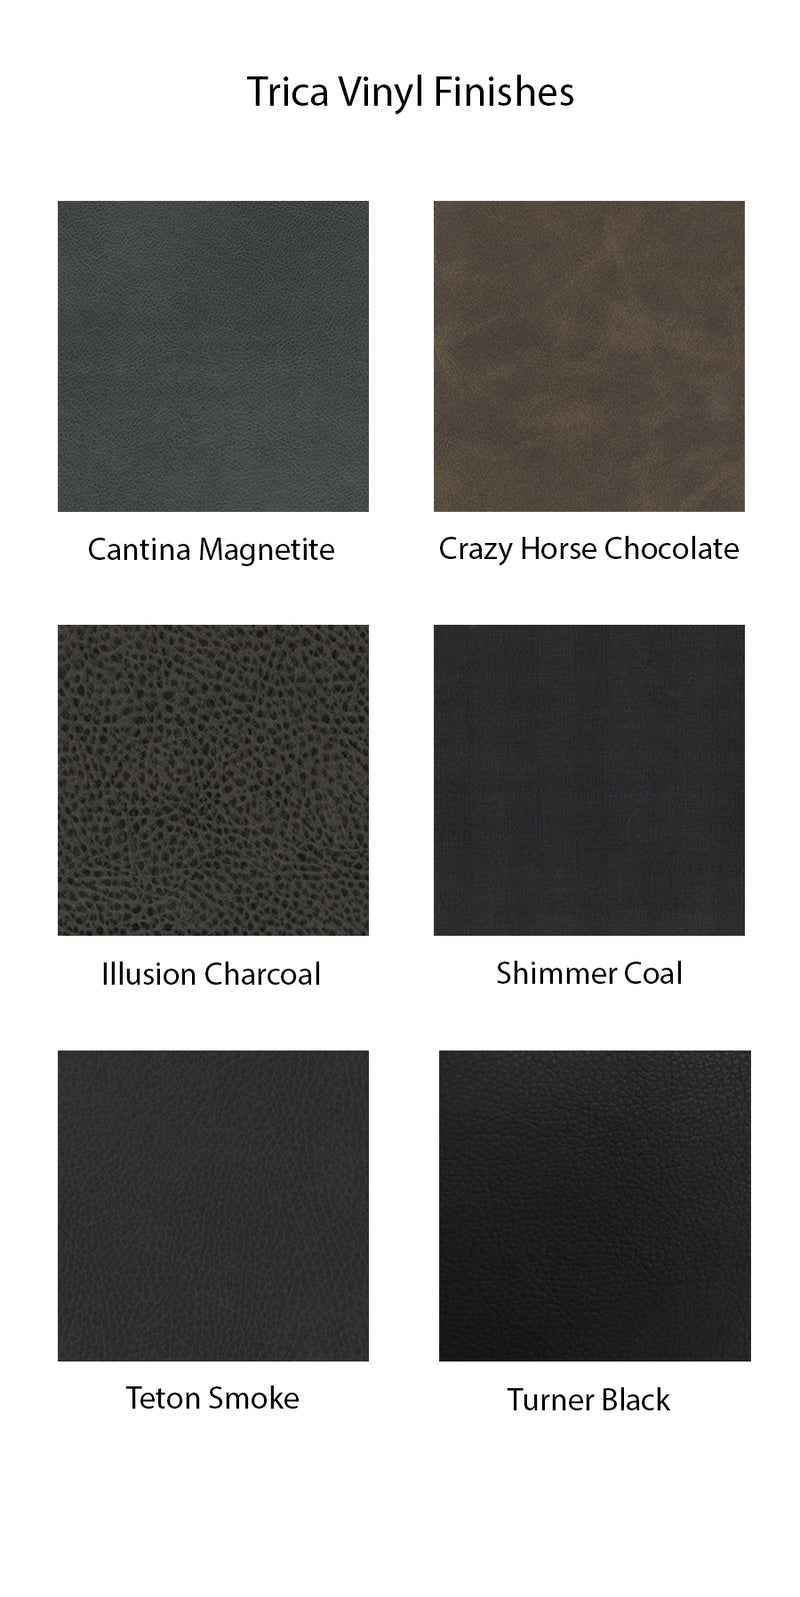 products/vinyl-finishes-trica_7b64acb5-03d7-48e3-98f6-6ad019449f88.jpg